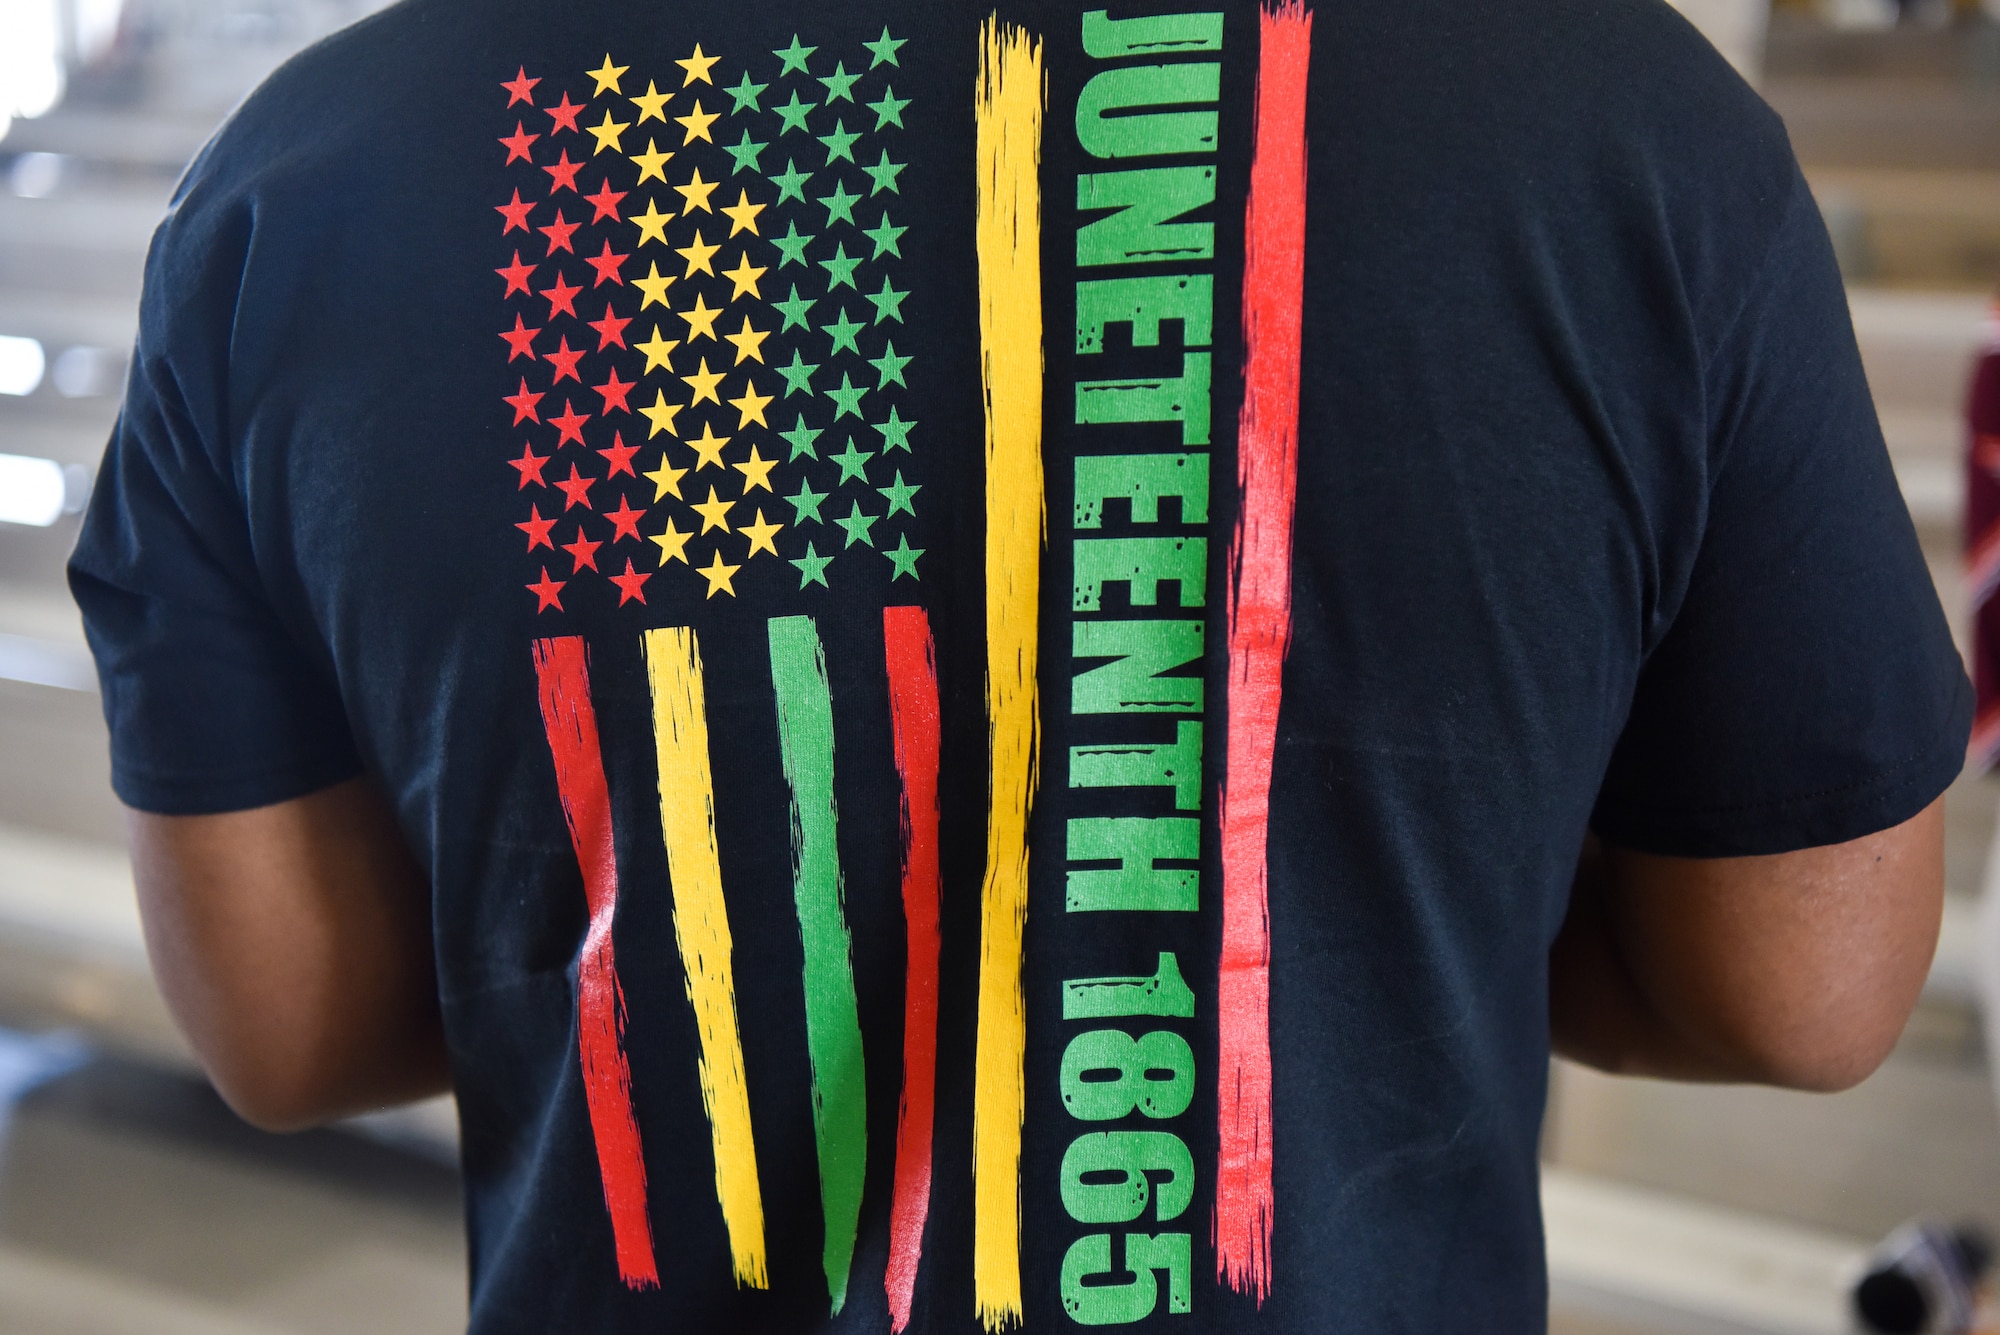 A Goodfellow member dons a Juneteenth shirt during the Juneteenth commemoration ceremony at Goodfellow Air Force Base, Texas, June 16, 2022. Juneteenth was established following the events of June 19, 1865, when Union General Gordon Granger arrived in Galveston, Texas and informed enslaved African Americans that the Civil War had ended and they were free. (U.S. Air Force photo by Staff Sgt. Jermaine Ayers)